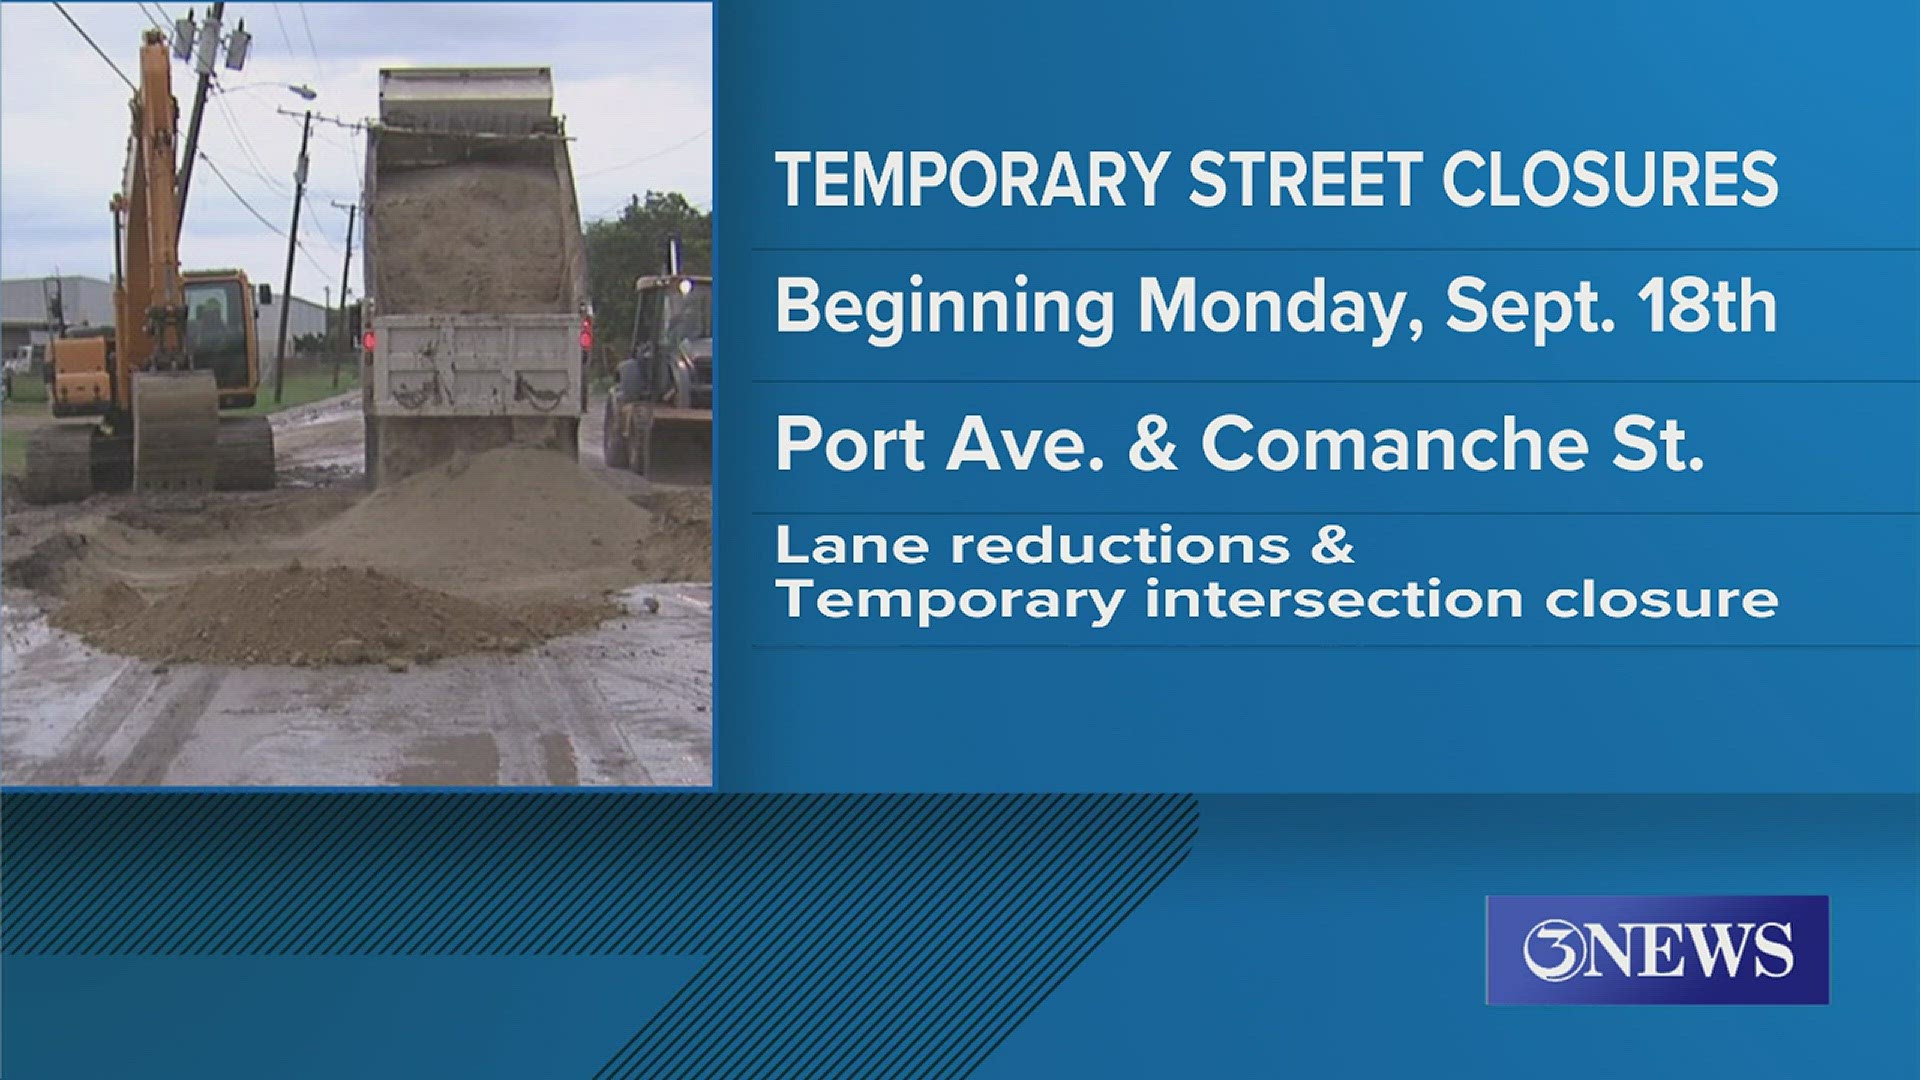 Wastewater and manhole work will be done in the area, causing the lane reductions.